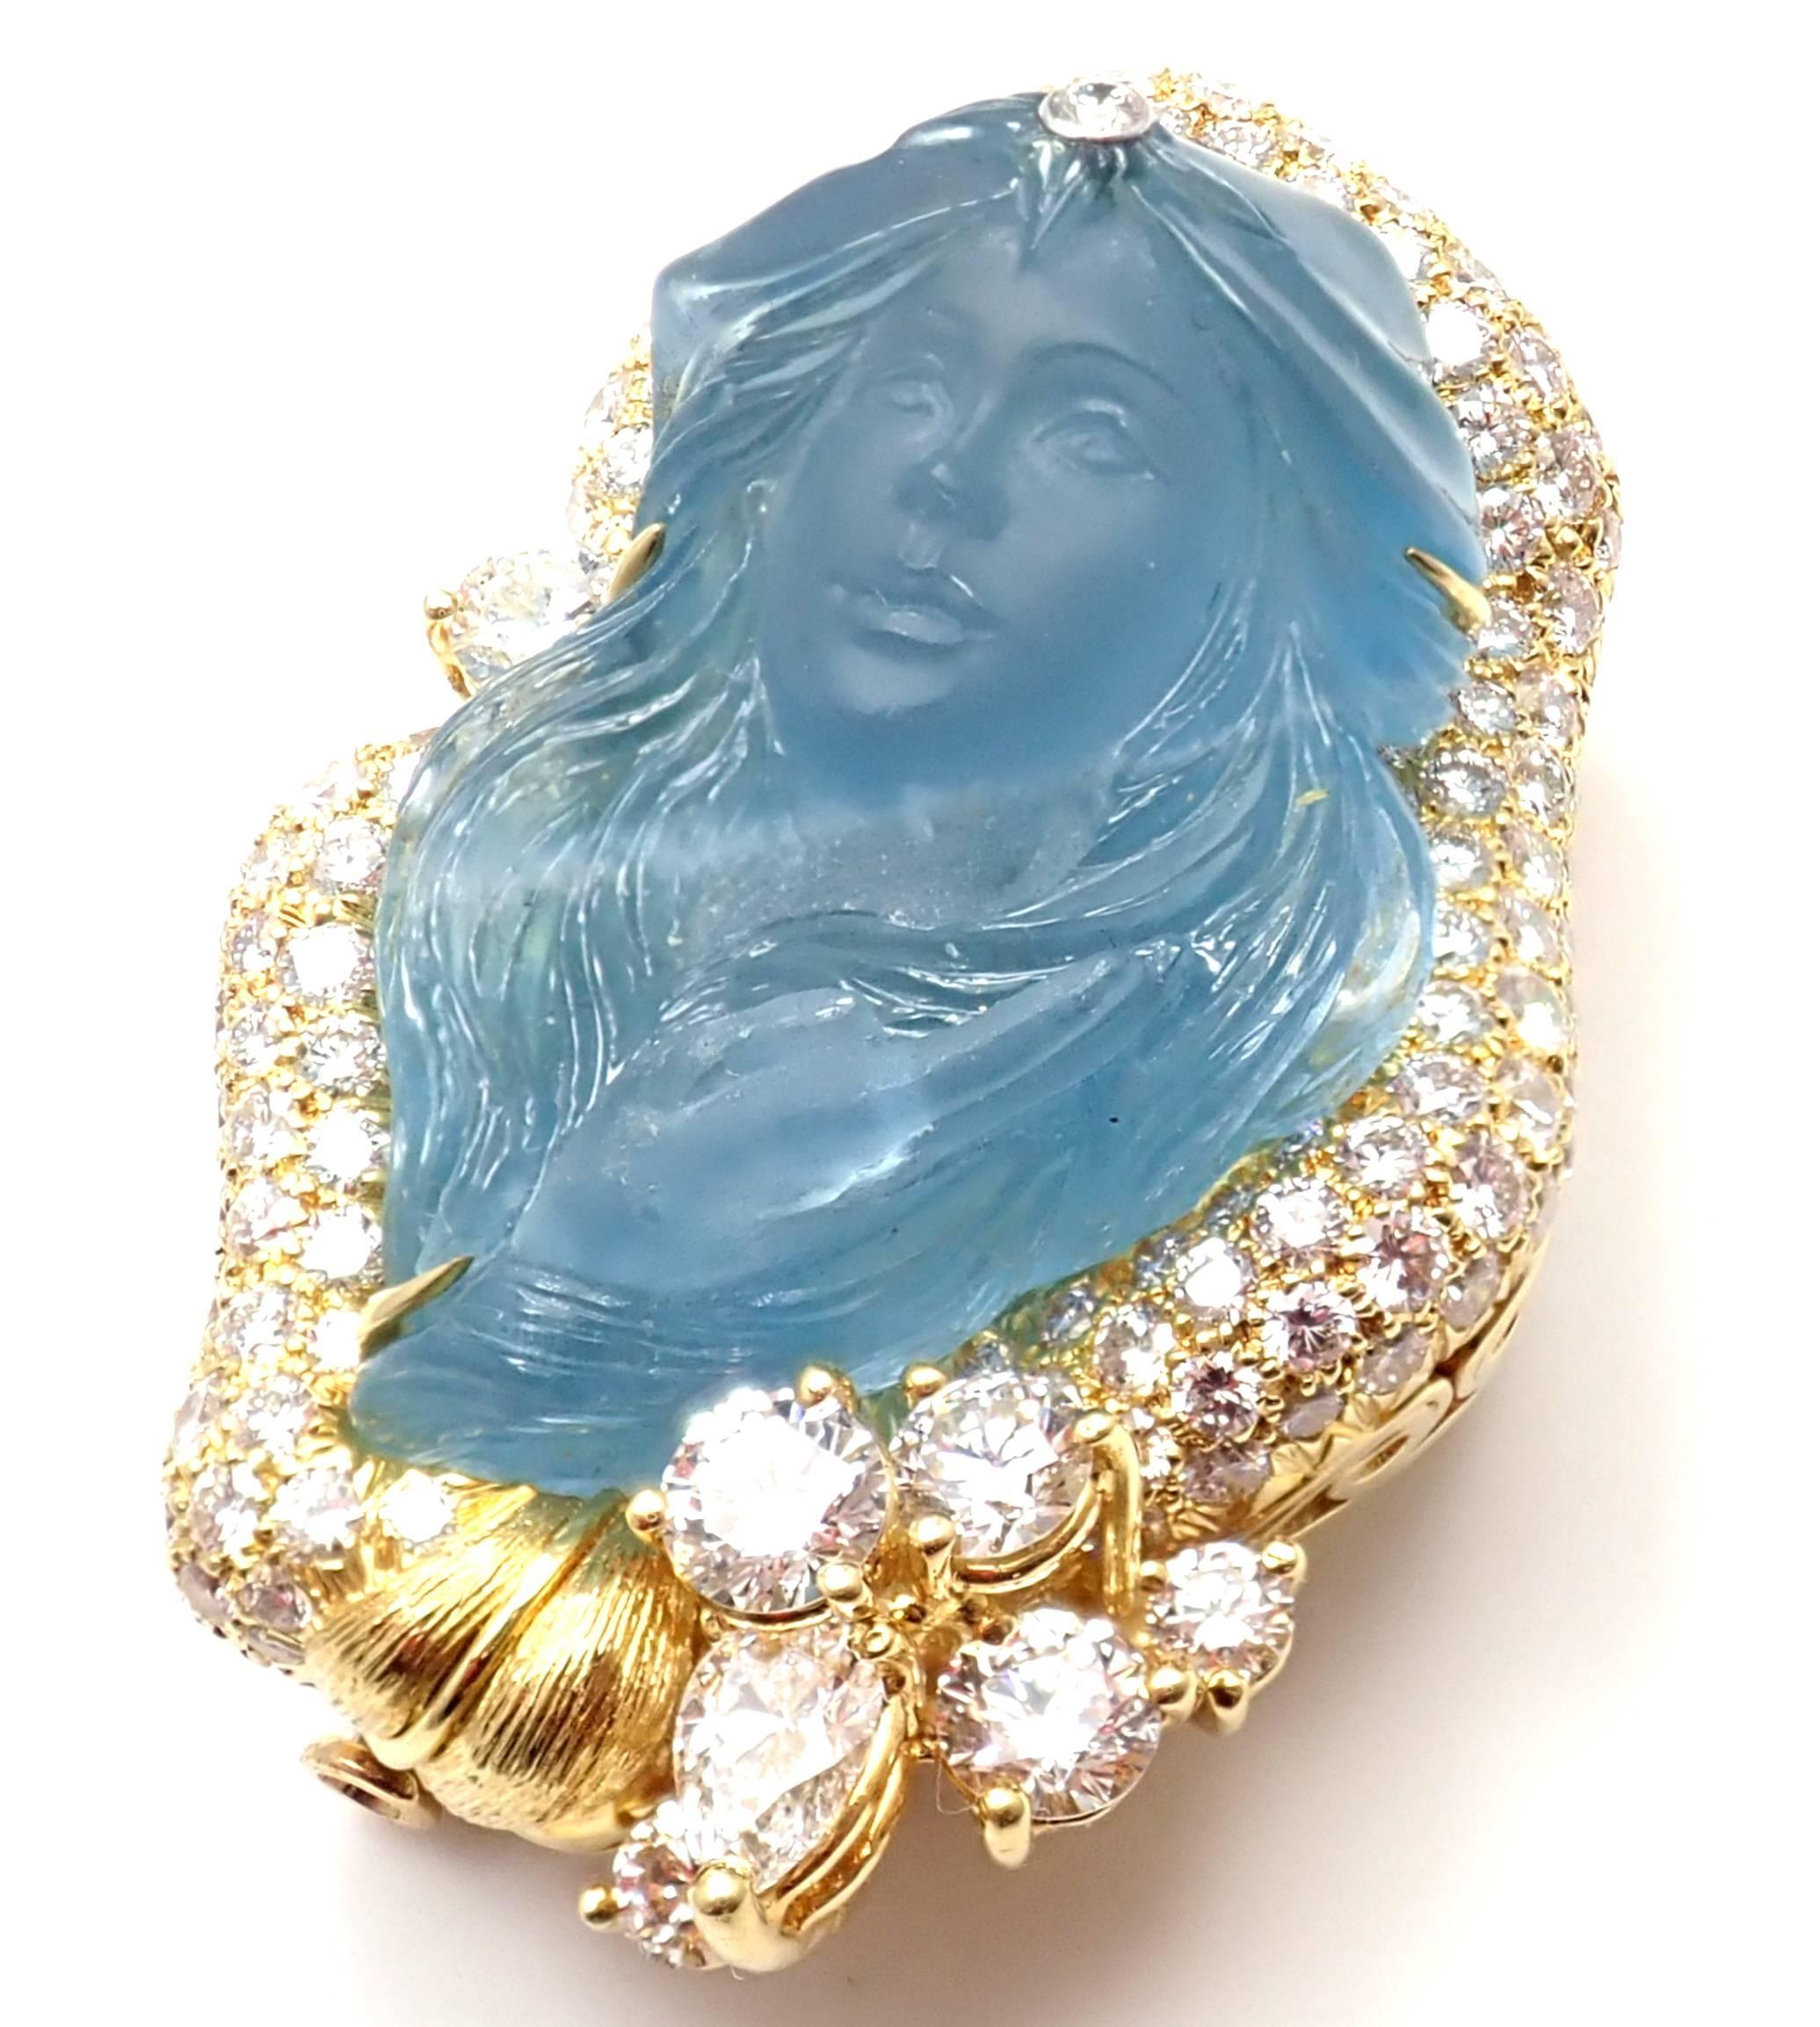 18k Yellow Gold Diamond Large Carved Aquamarine Pin Brooch By Henry Dunay. 
With 130 round brilliant cut diamonds VVS1 clarity G color total weight approx.7ct
1 carved aquamarine 34mm x 22mm approx. .30ct
Details:
Measurements: 44mm x 30mm
Weight: